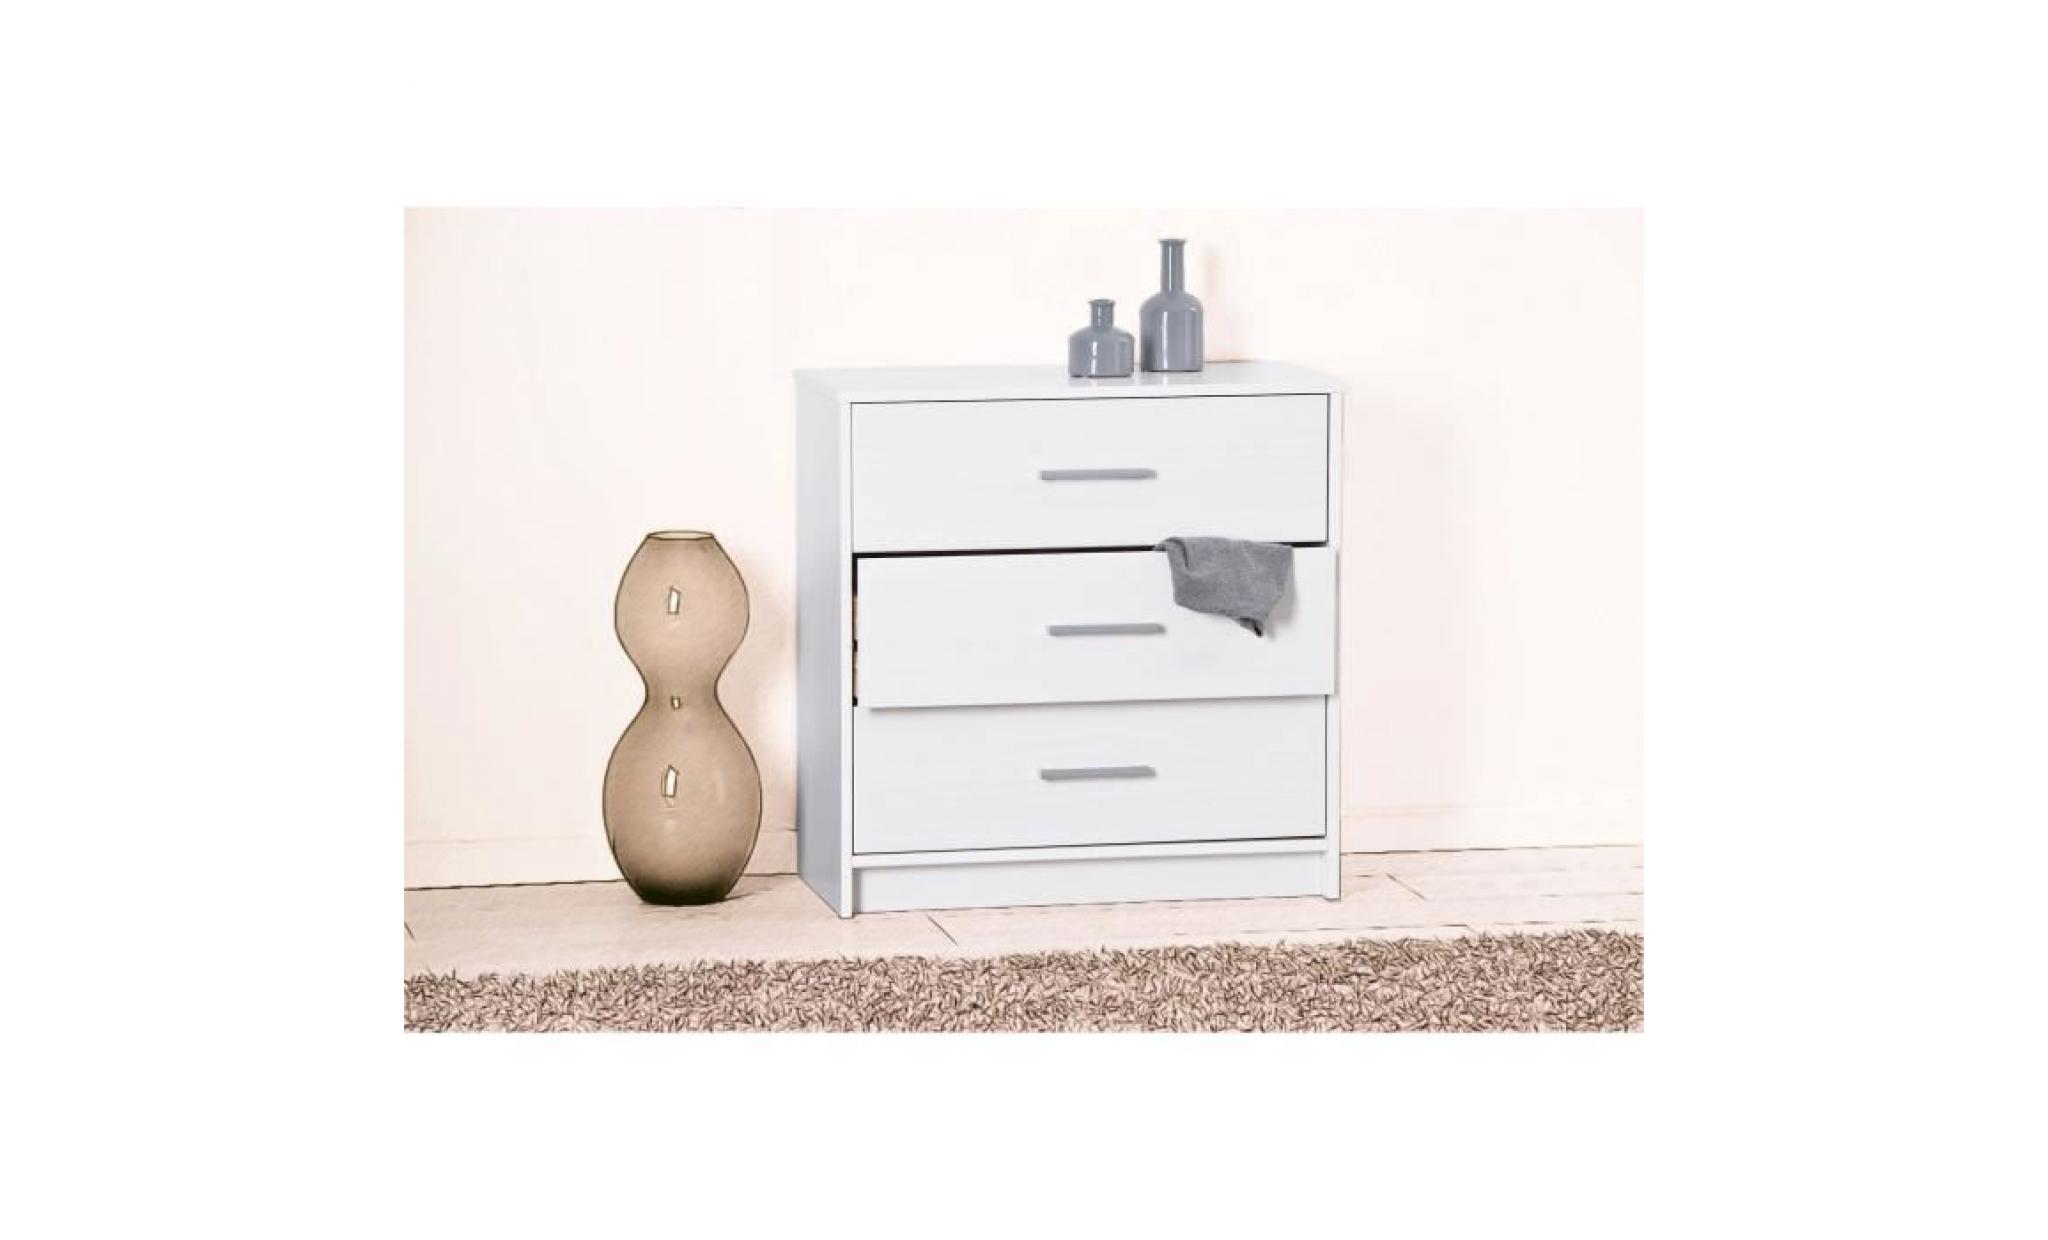 commode moderne 3 tiroirs, commode en pin massif, commode chambre blanche, commode rangement, commode chambre adulte, commode large pas cher